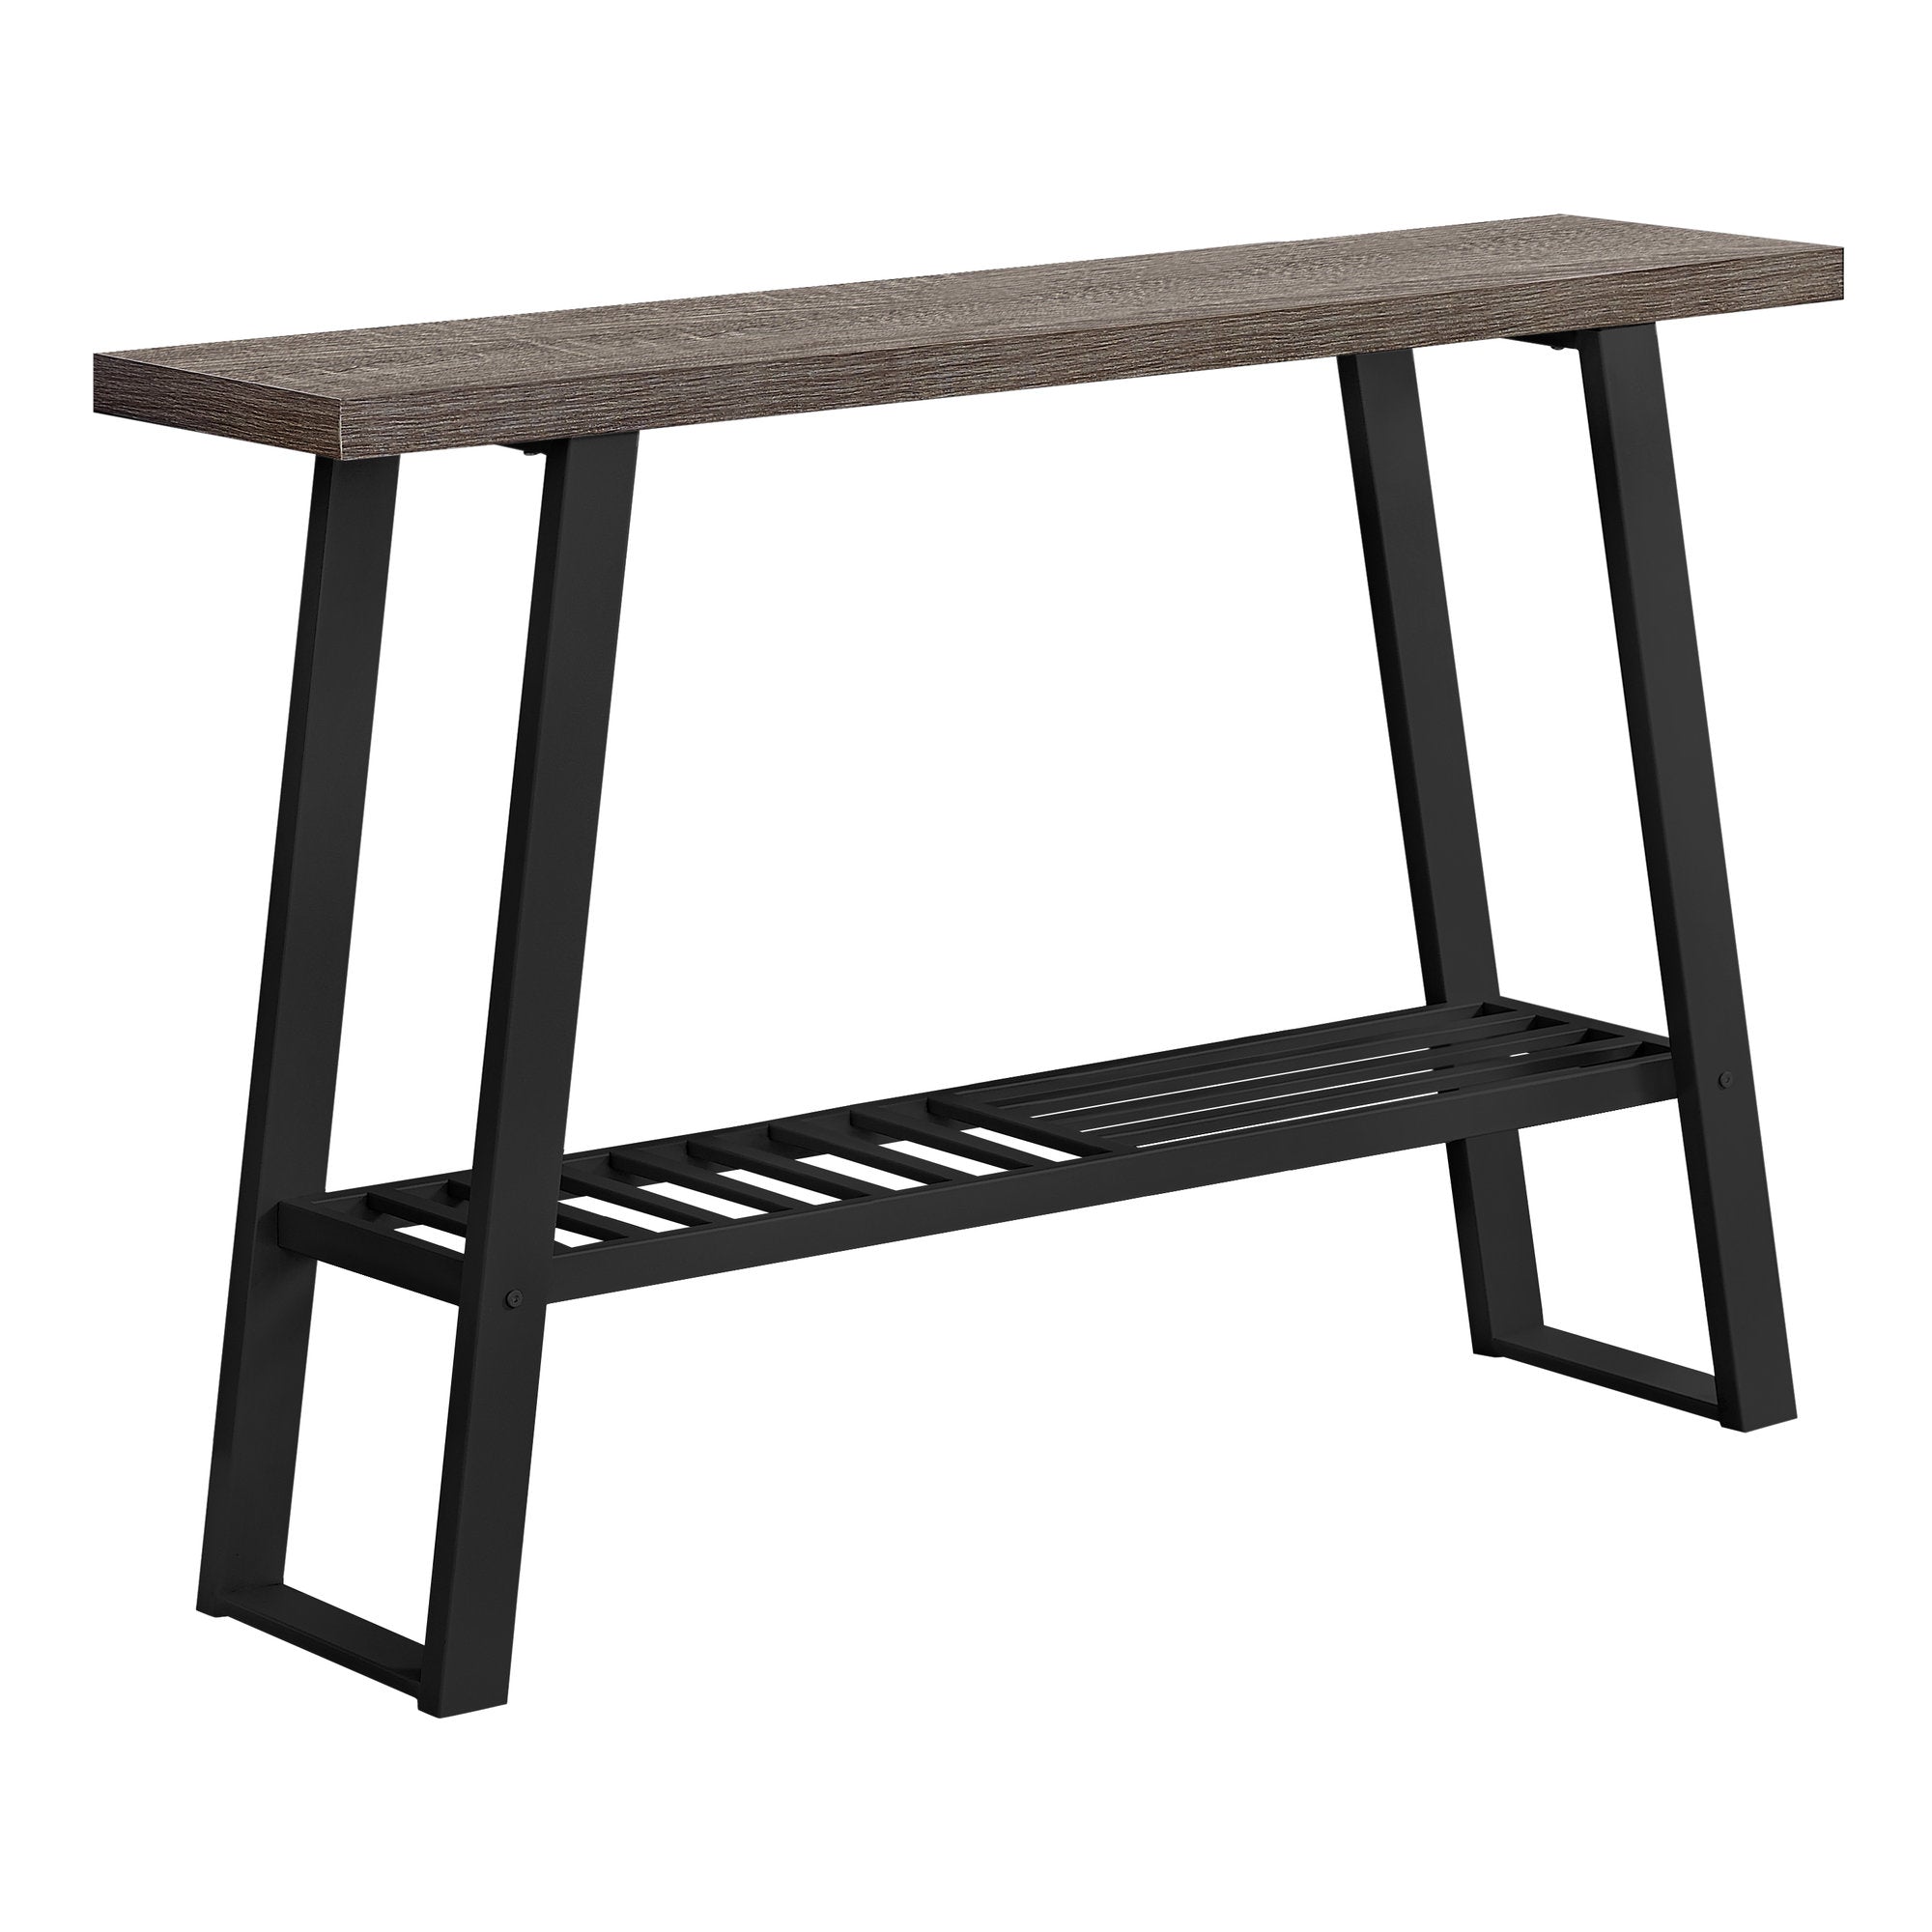 Accent Table - 48L / Dark Taupe / Black Hall Console